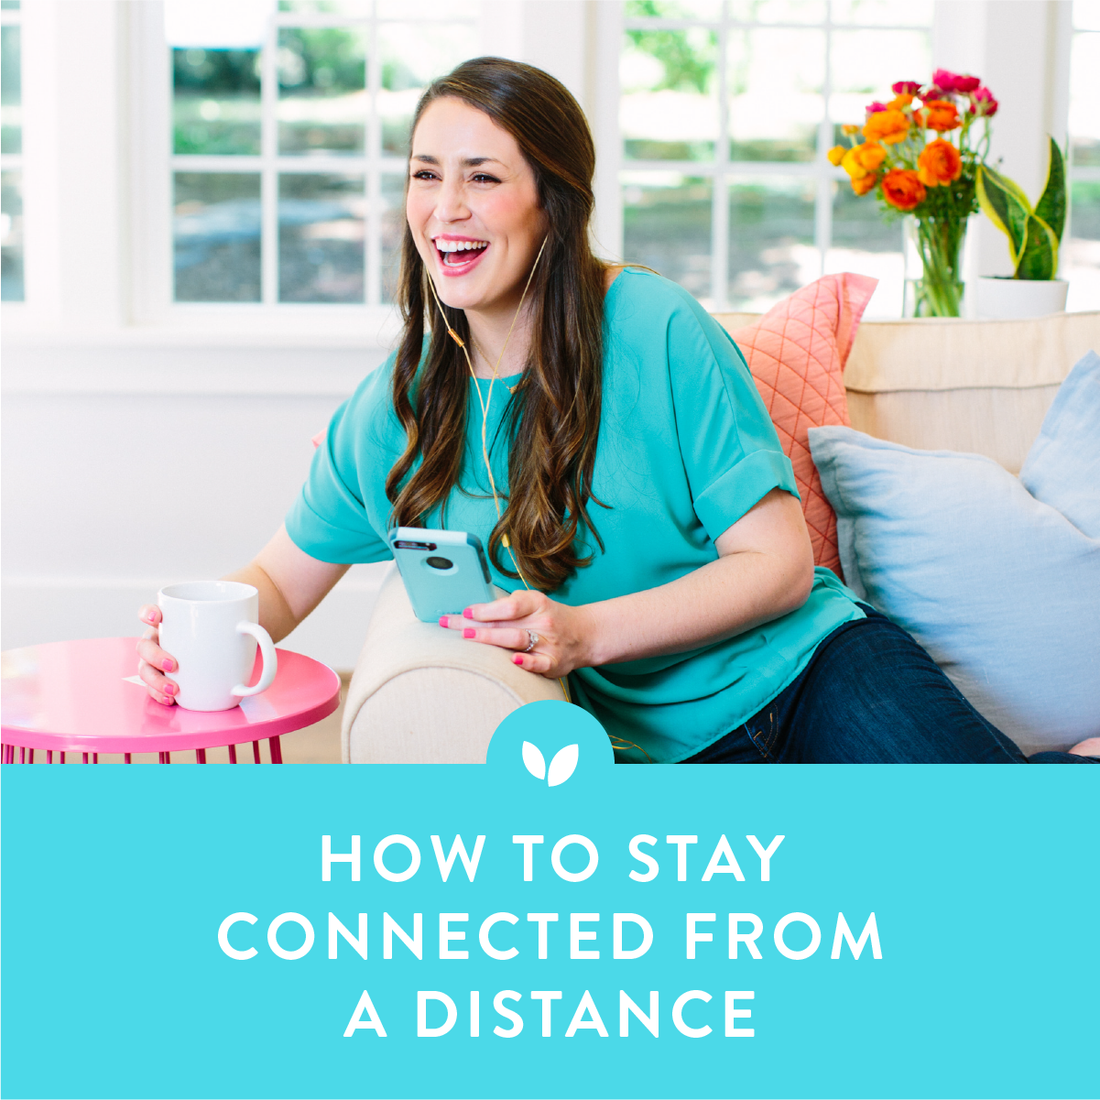 How to Stay Connected From a Distance